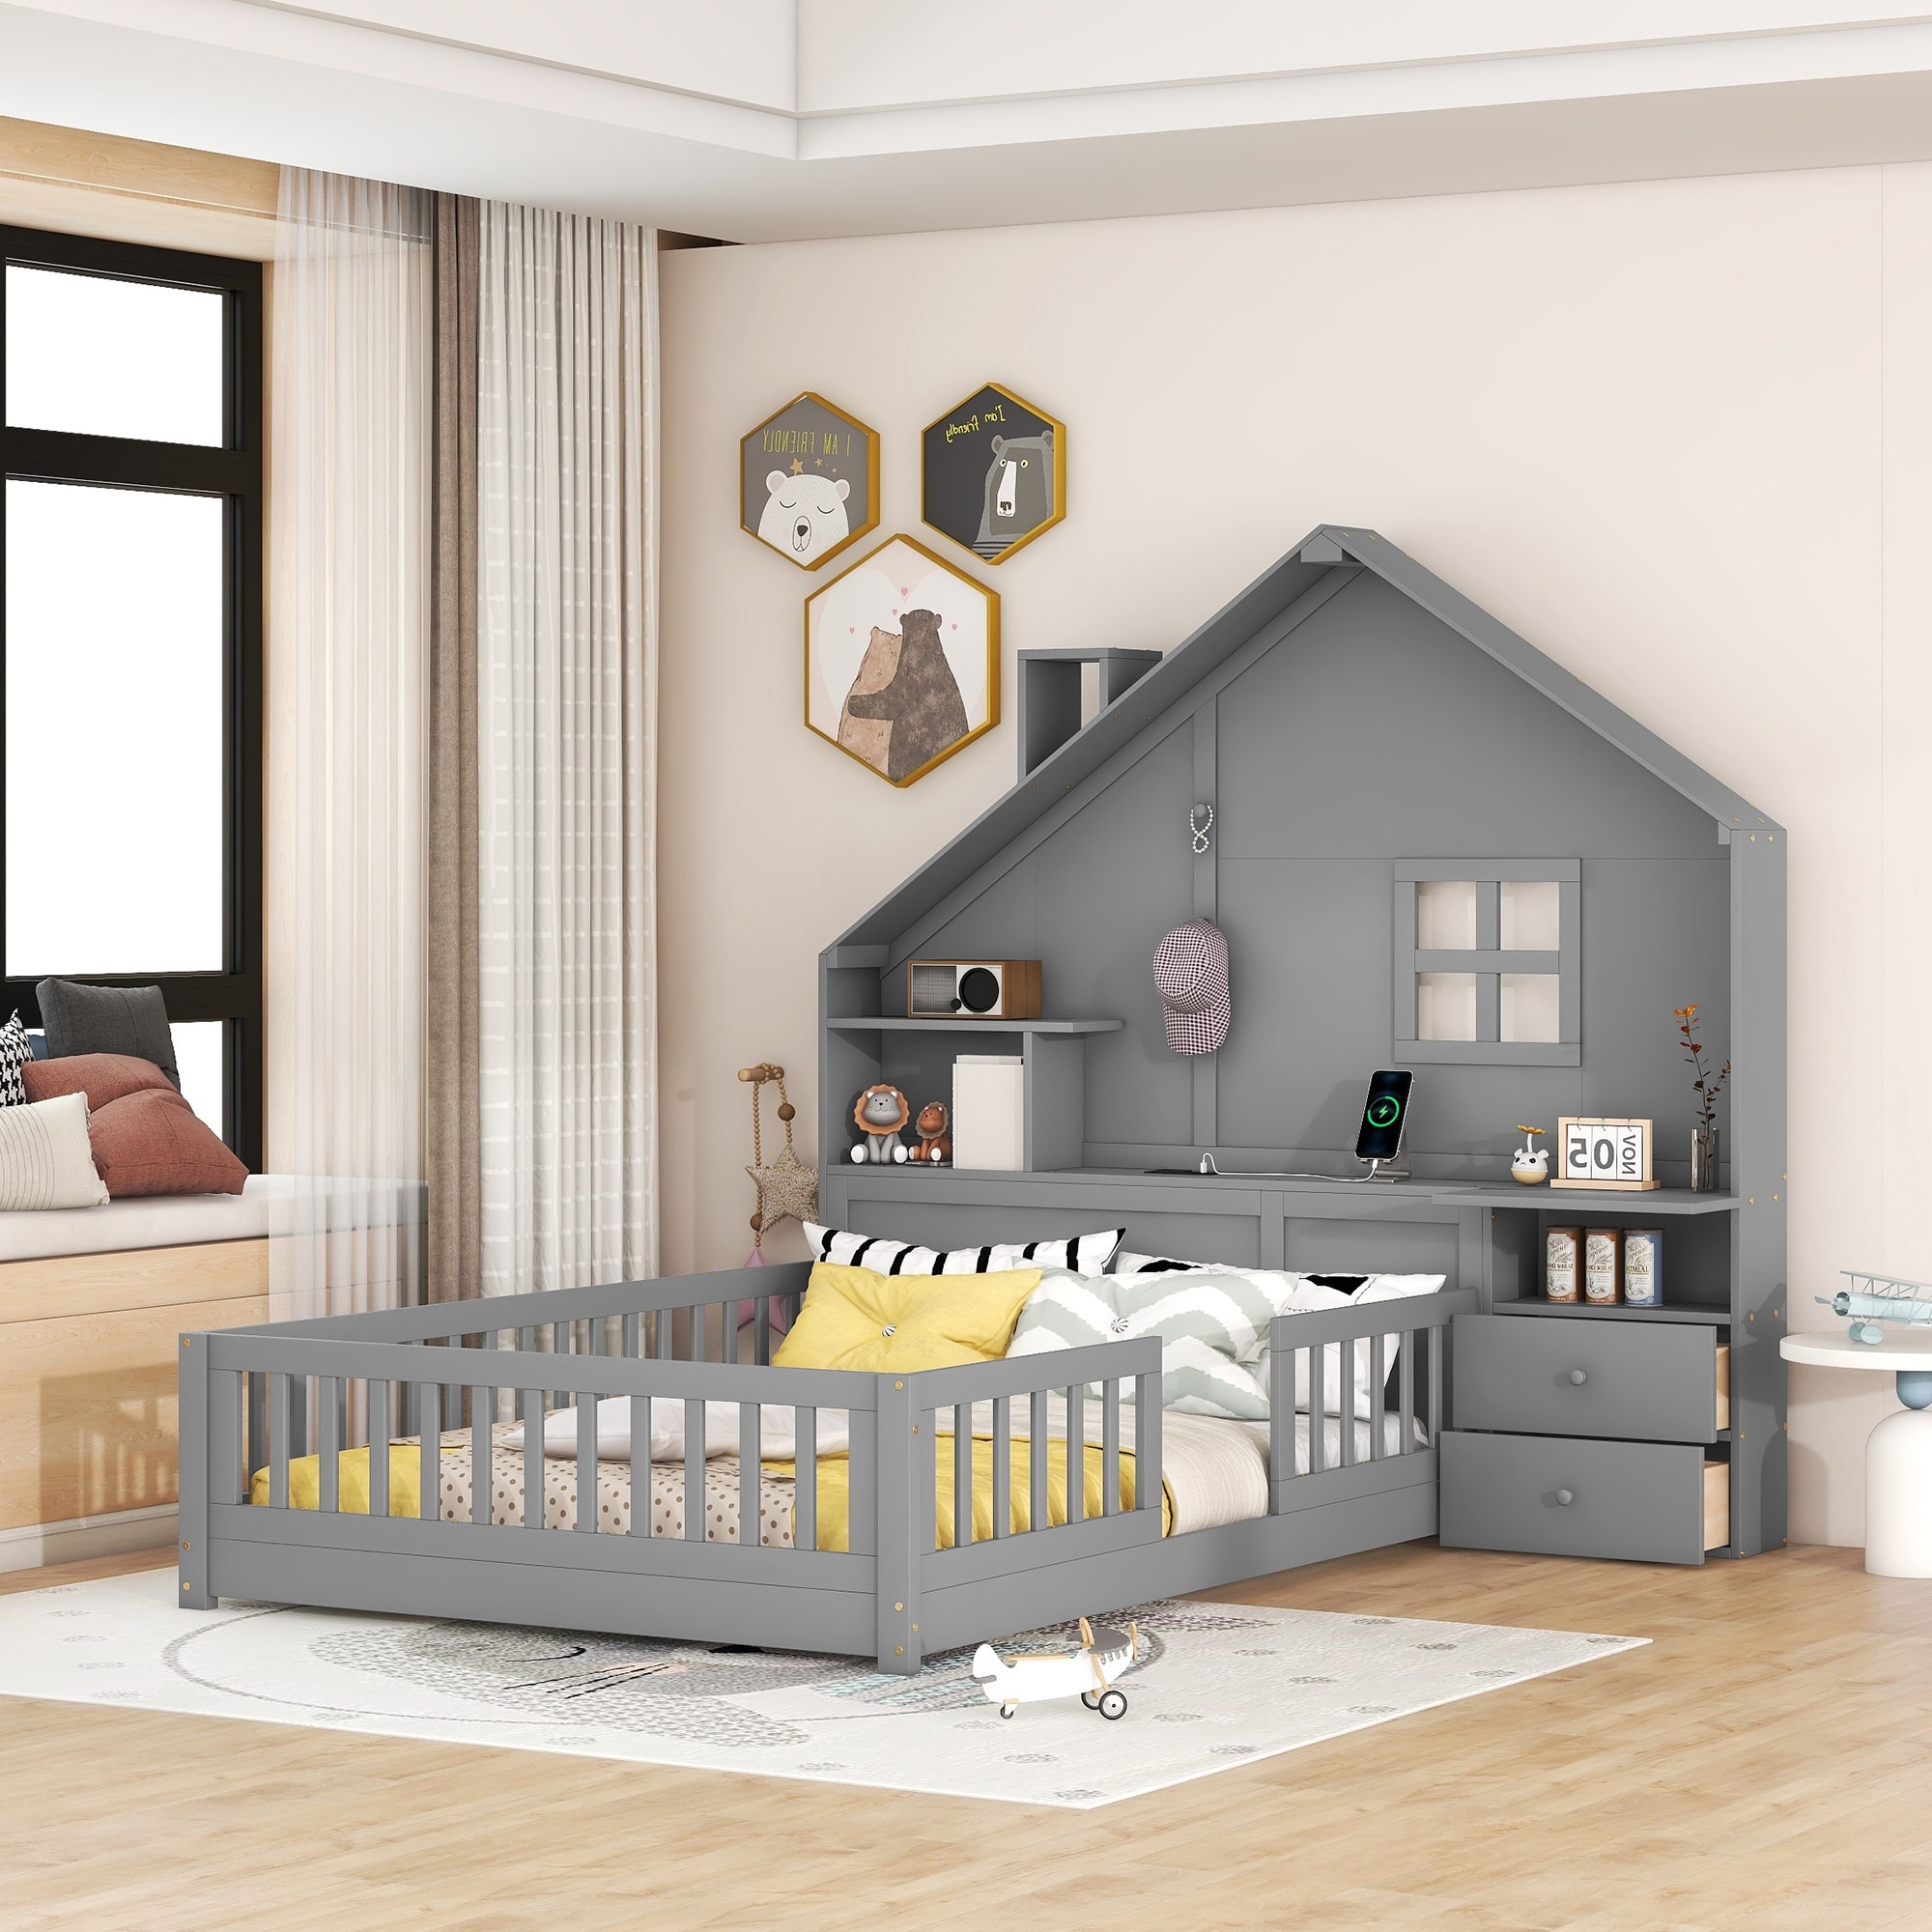 https://ak1.ostkcdn.com/images/products/is/images/direct/429a40743efb606a8482c6ccdeb9b939c097c0bd/Full-Kids-House-Bed-with-Shelves-%26-a-Set-of-Sockets-and-USB-Port%2C-Wood-Montessori-Floor-Bed-with-Rails%2C-Window-%26-Bedside-Drawers.jpg